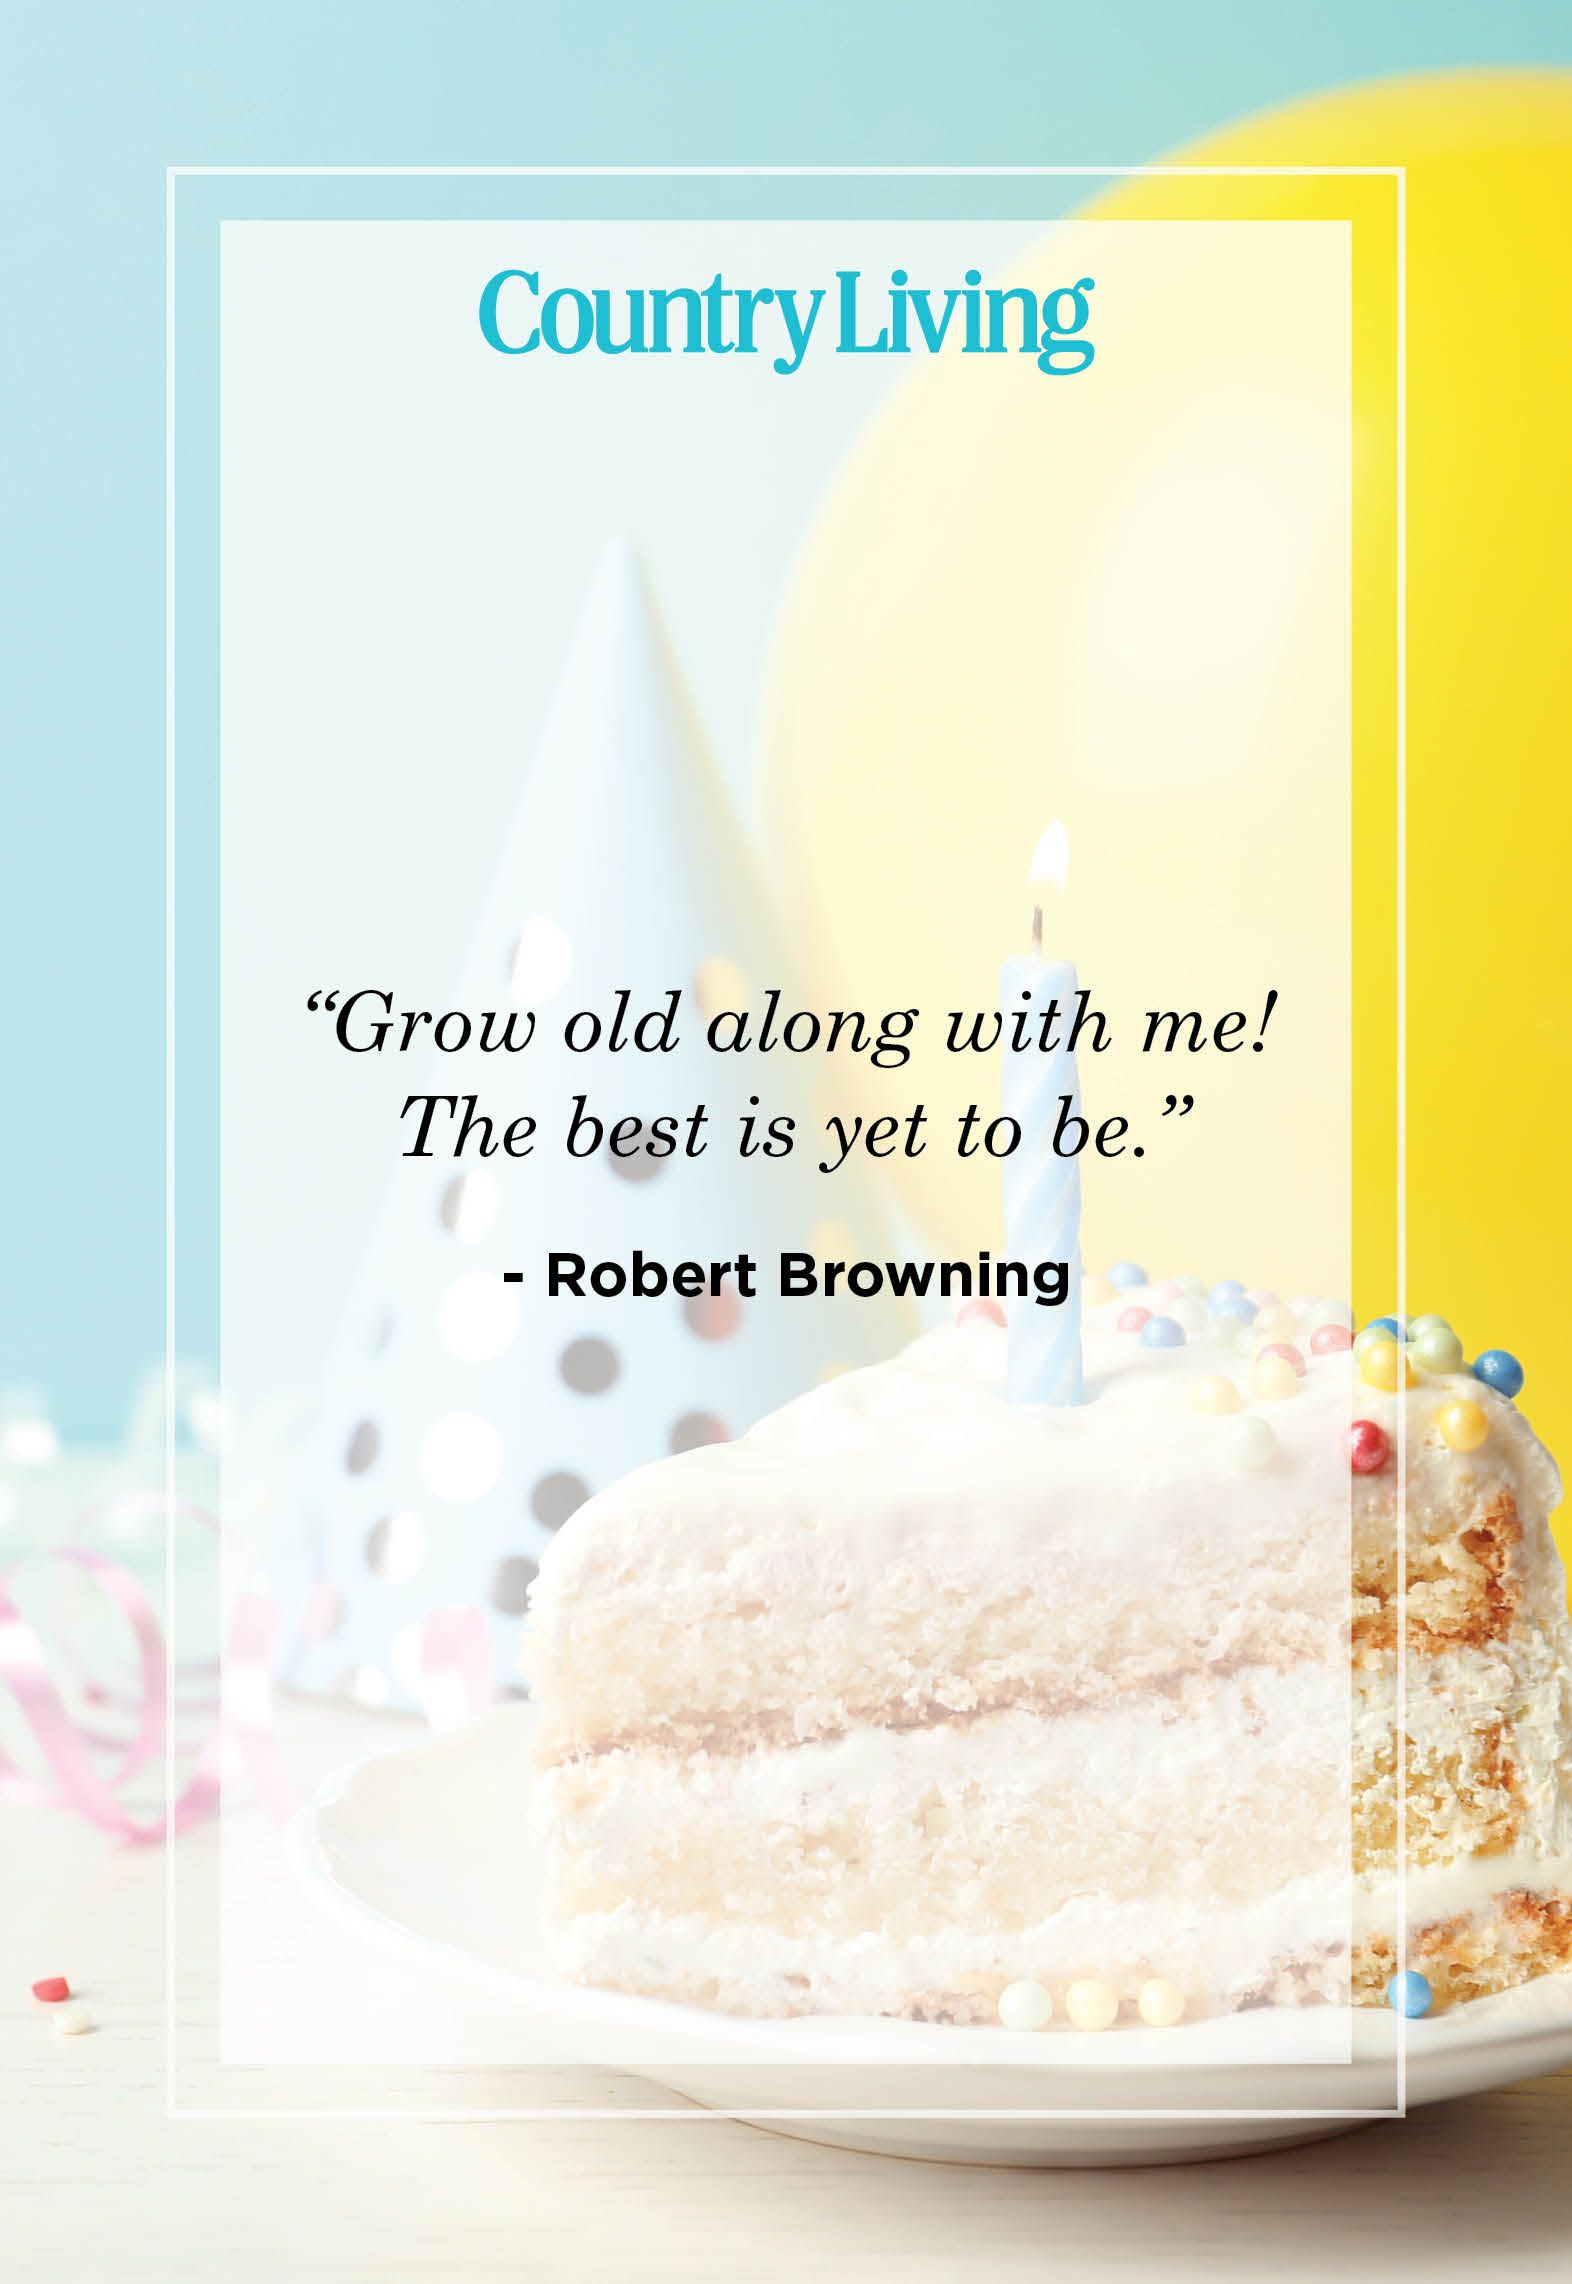 100 Cake Quotes To Get You Baking a Delectable Dessert